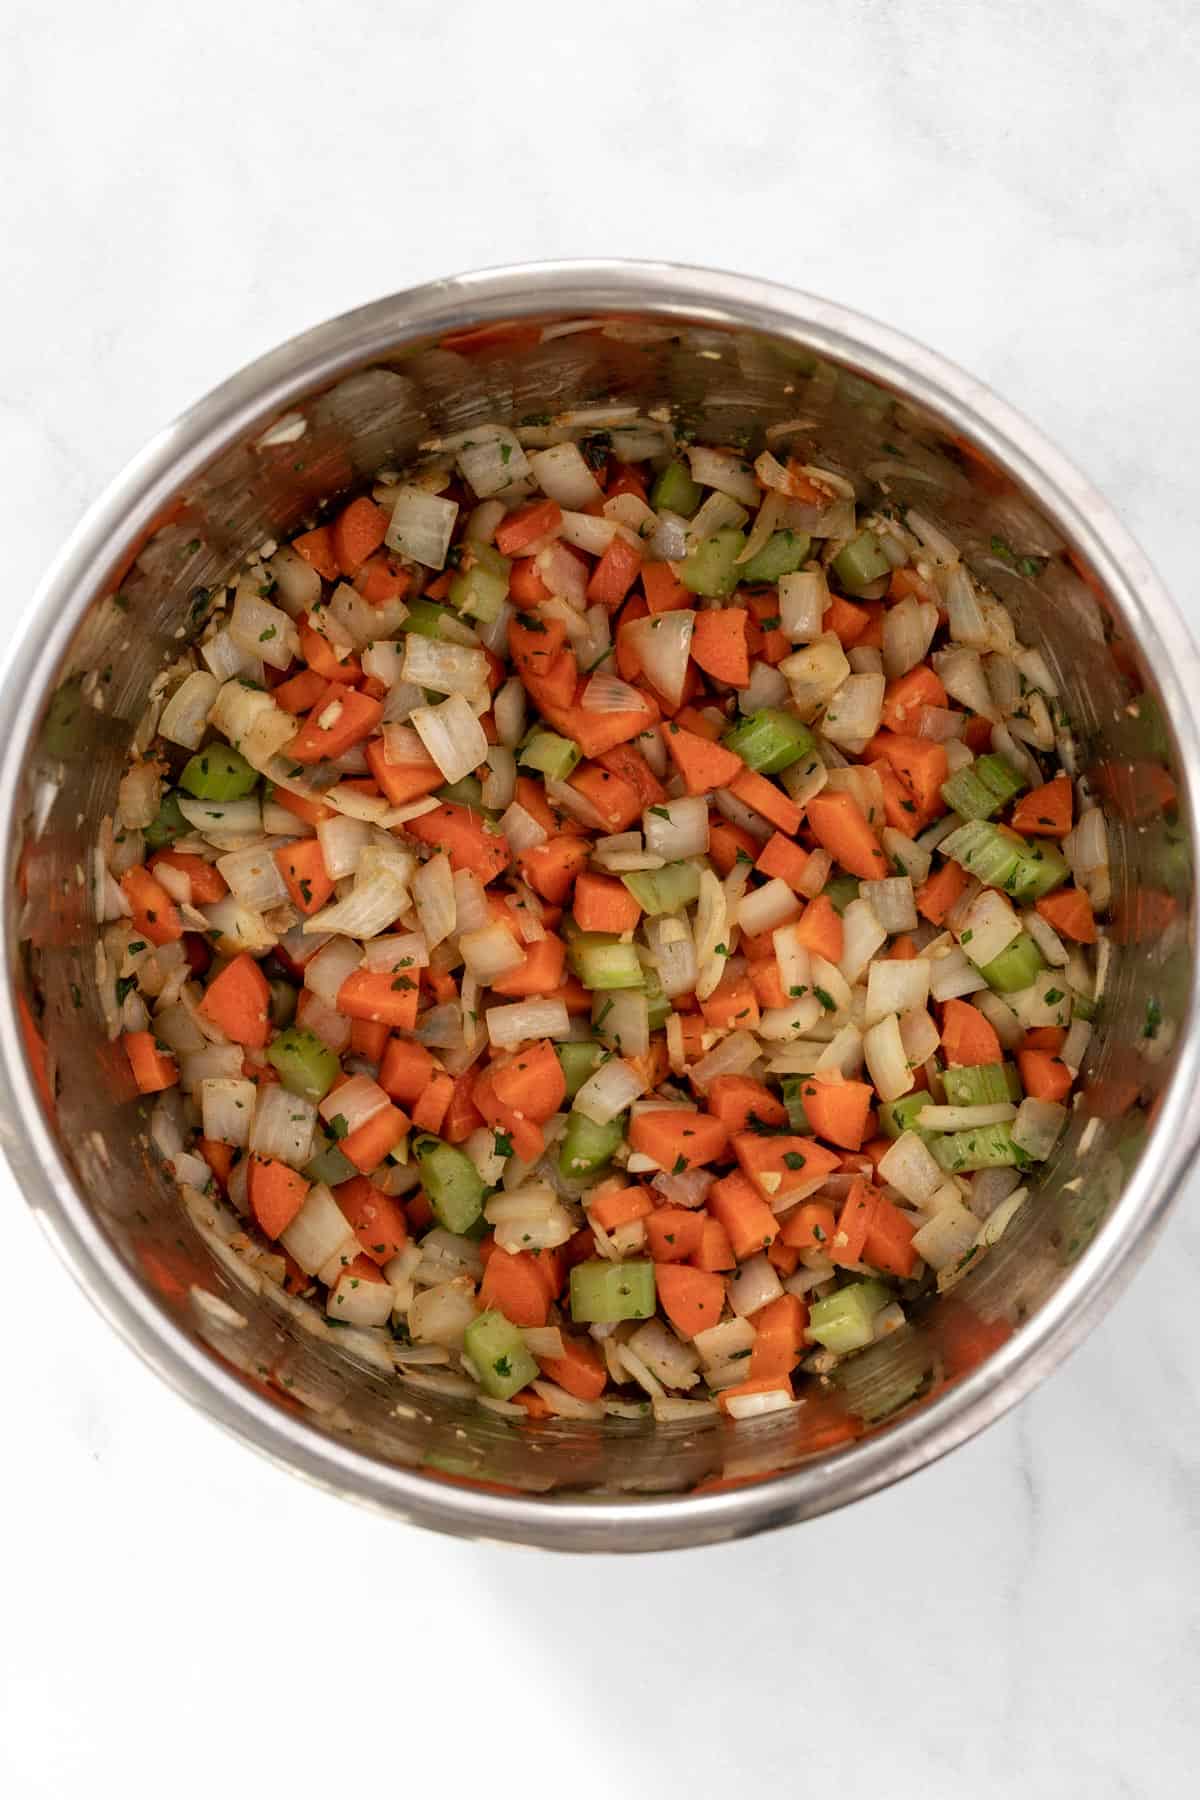 Chopped onions, carrots, and celery in the pot of an instant pot.